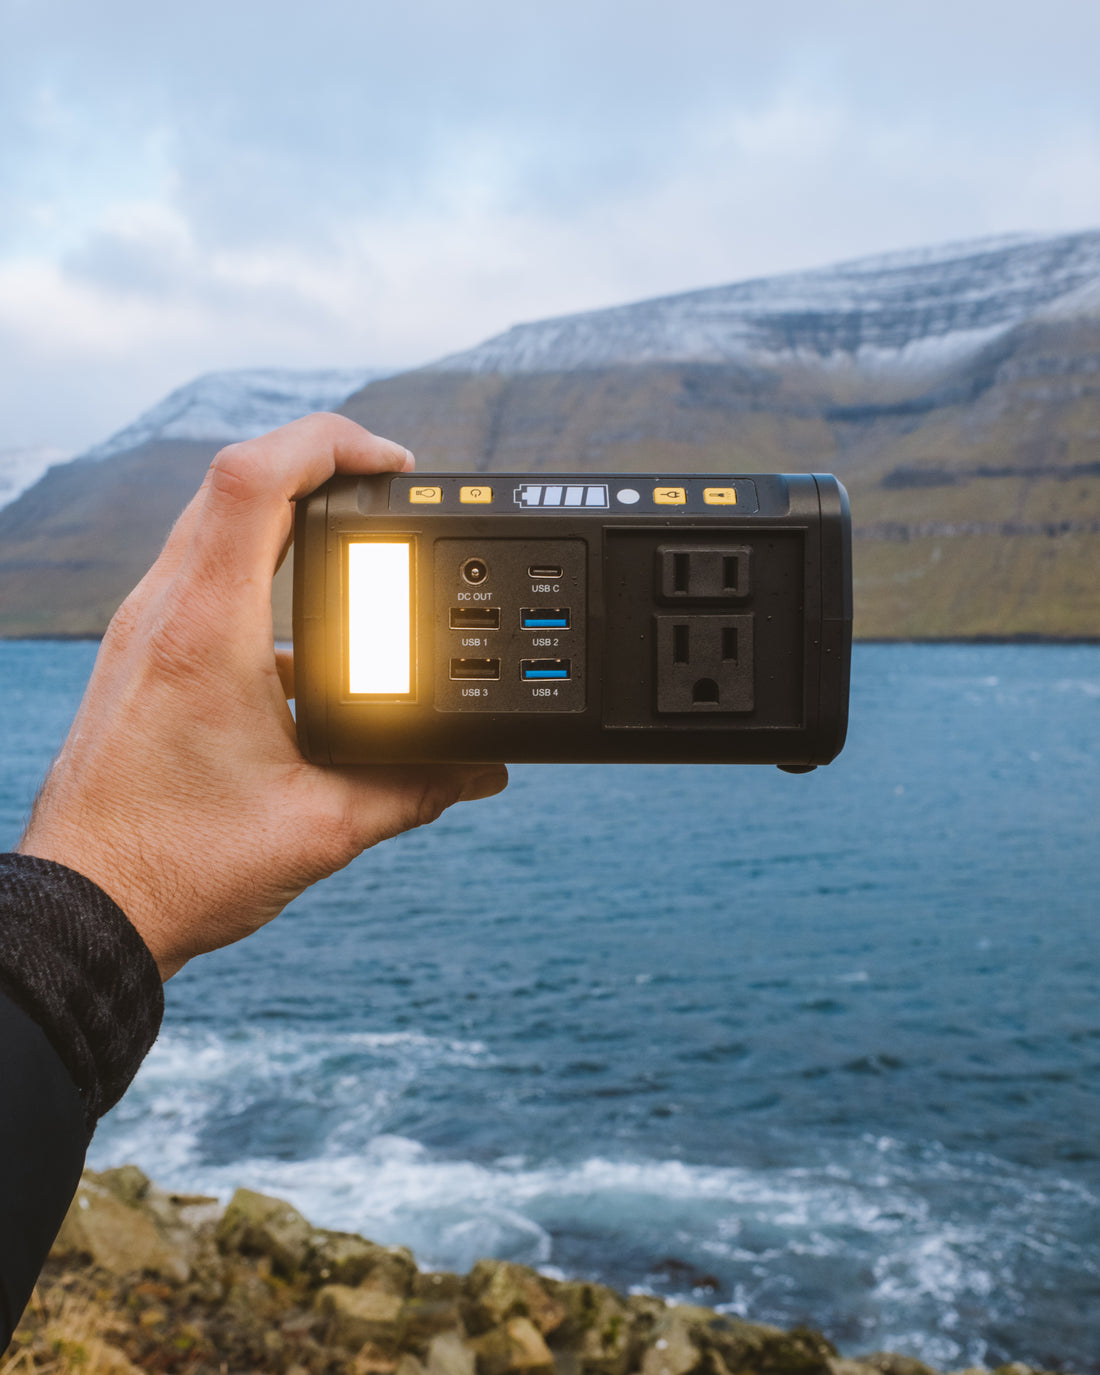 Portable Power Stations: Your Reliable Source of On-the-Go Power